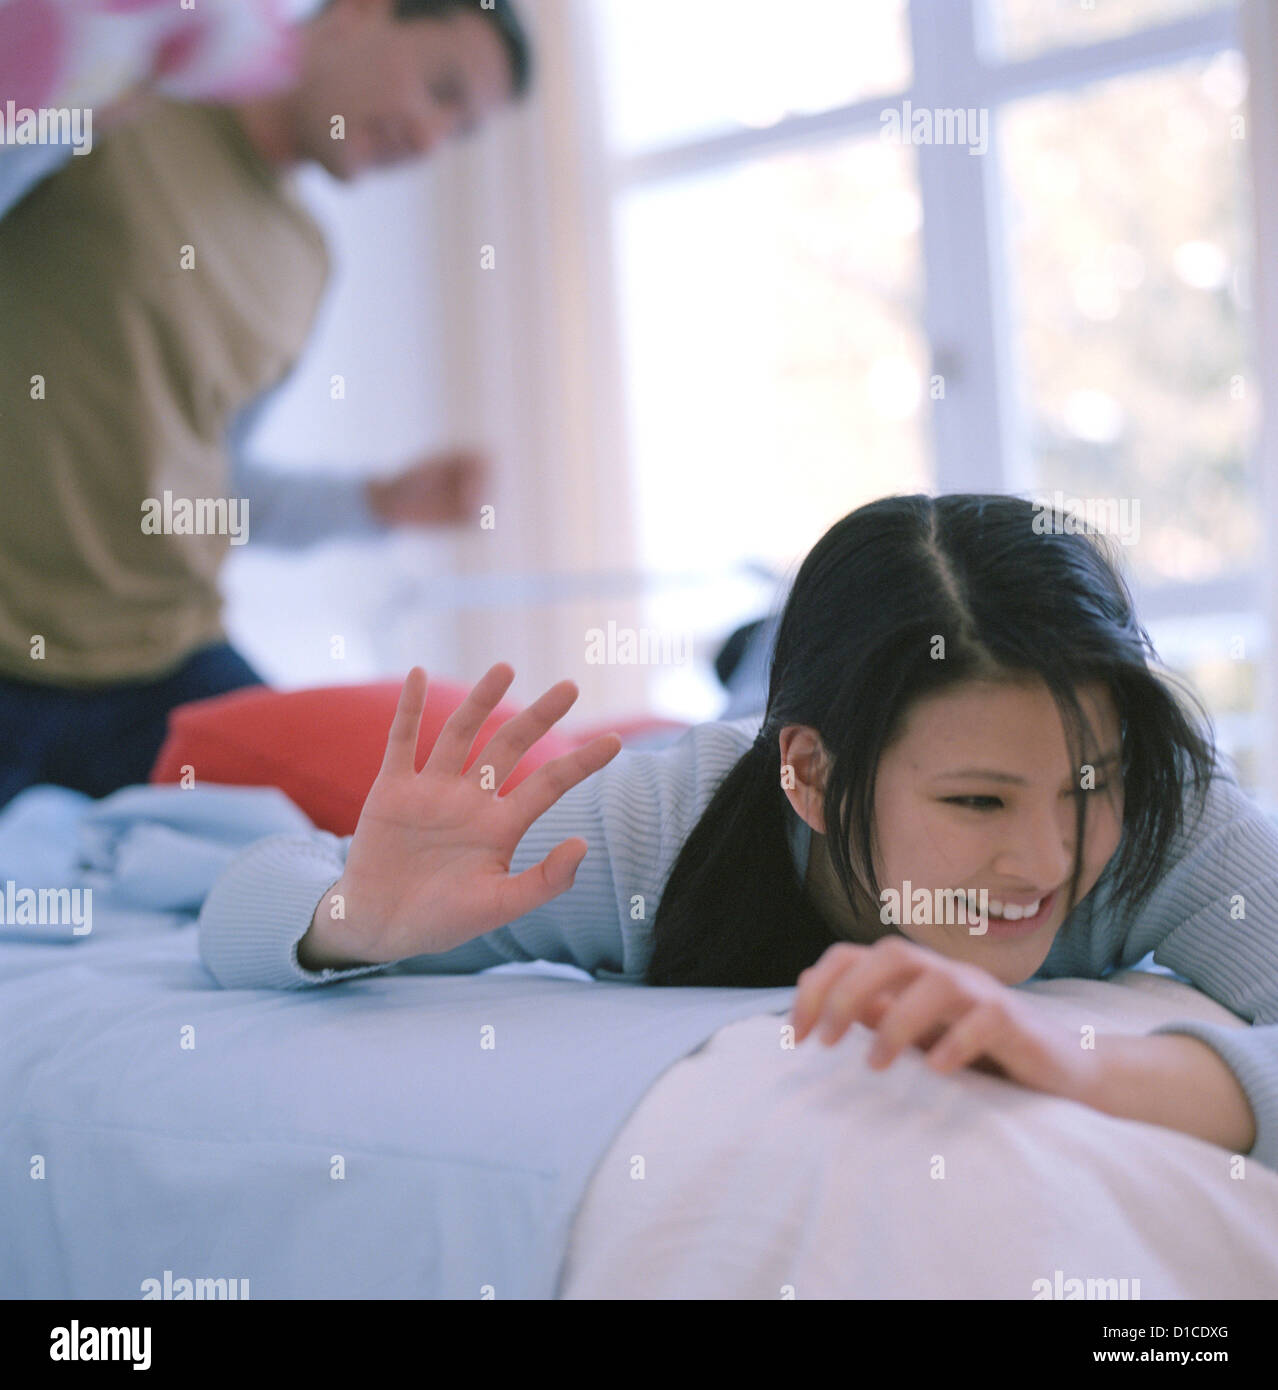 two people playing in the bed License free except ads and billboards Stock Photo